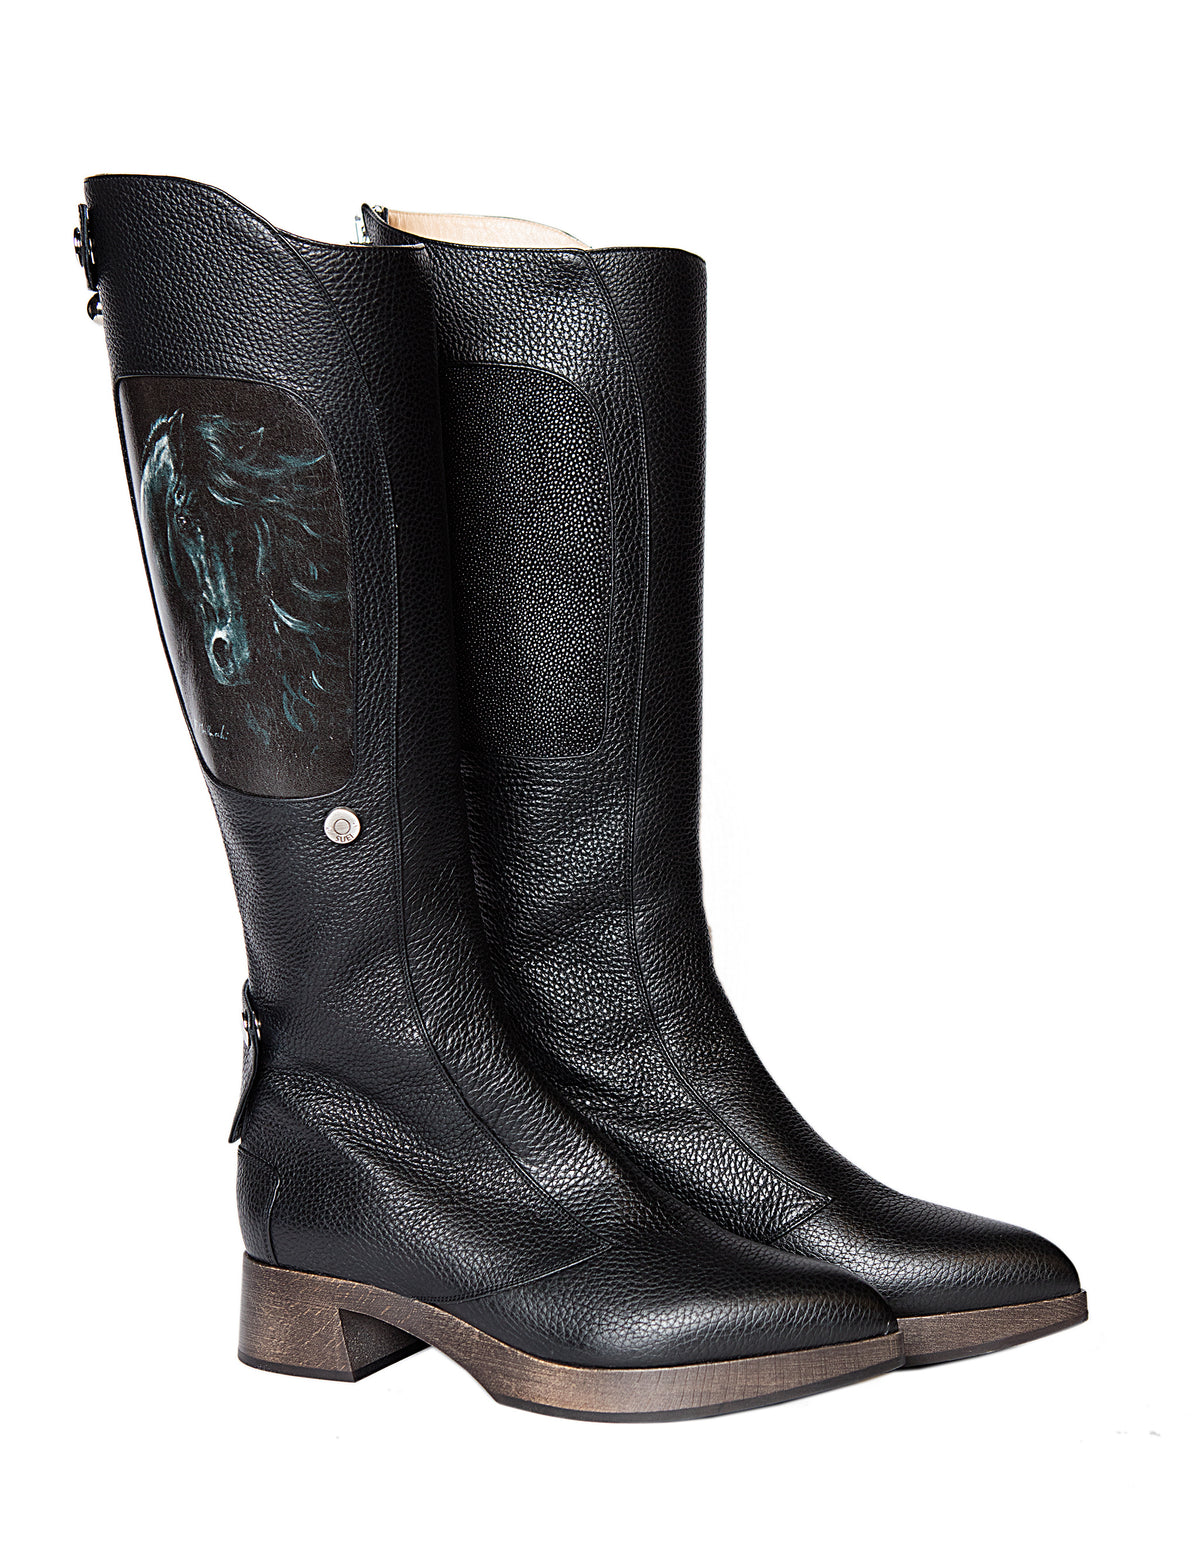 BOOTS WITH BLACK HORSE ART PRINTING